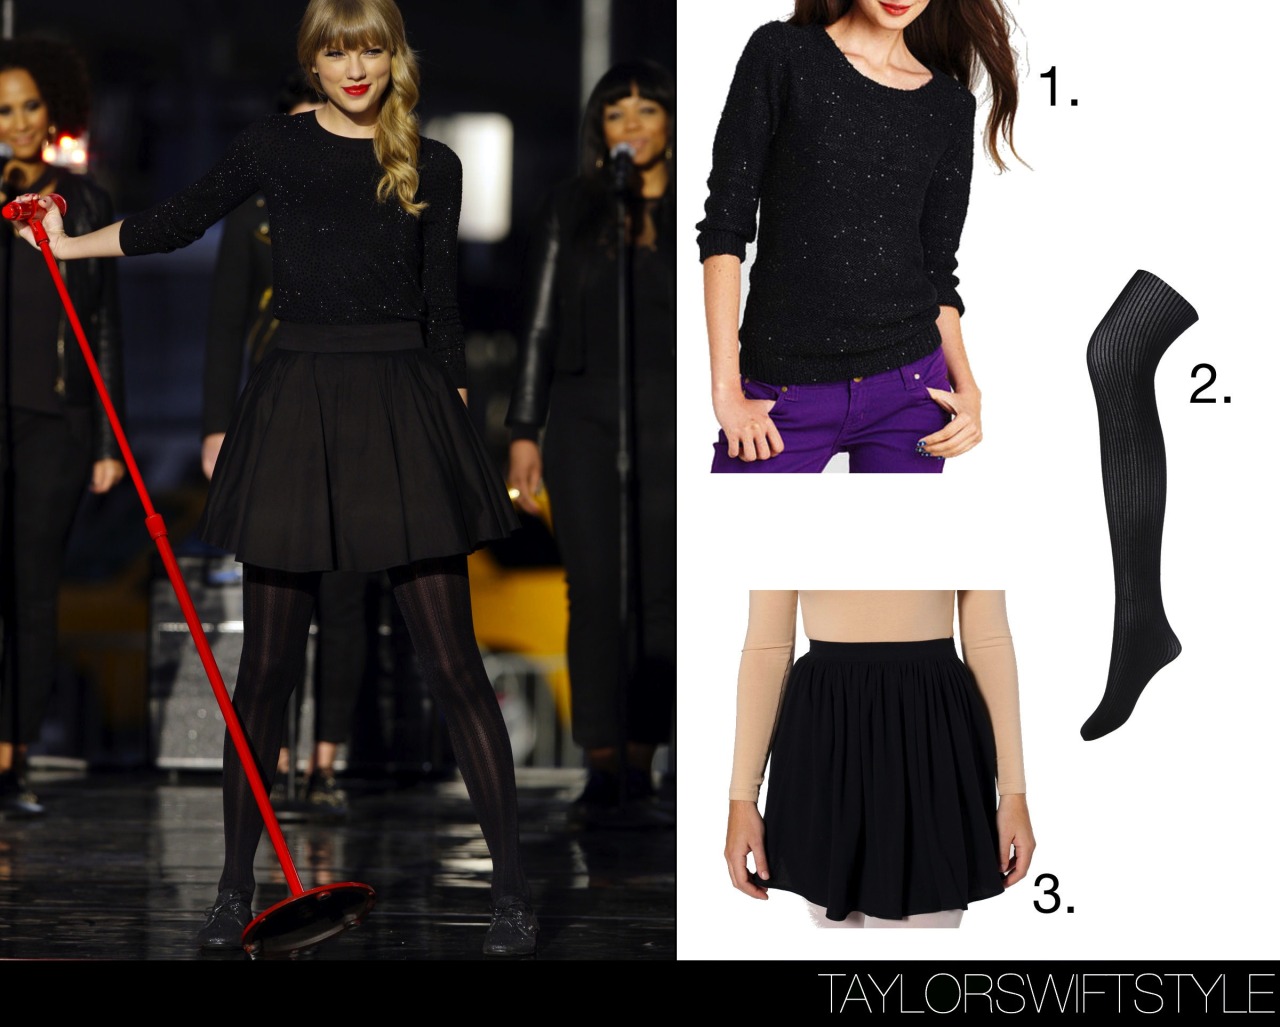 taylorswiftstyle:Performing on Good Morning America | October 23, 2012GET THE LOOK:Delia ‘Sequin Pullover Long Sleeve’ - $14.99Forever 21 ‘Striped Ridge TIghts’ - $5.80American Apparel ‘Piqué Full Woven Skirt’ - $38.00Taylor&#8217;s Get The Look blouse we identified is now on sale!